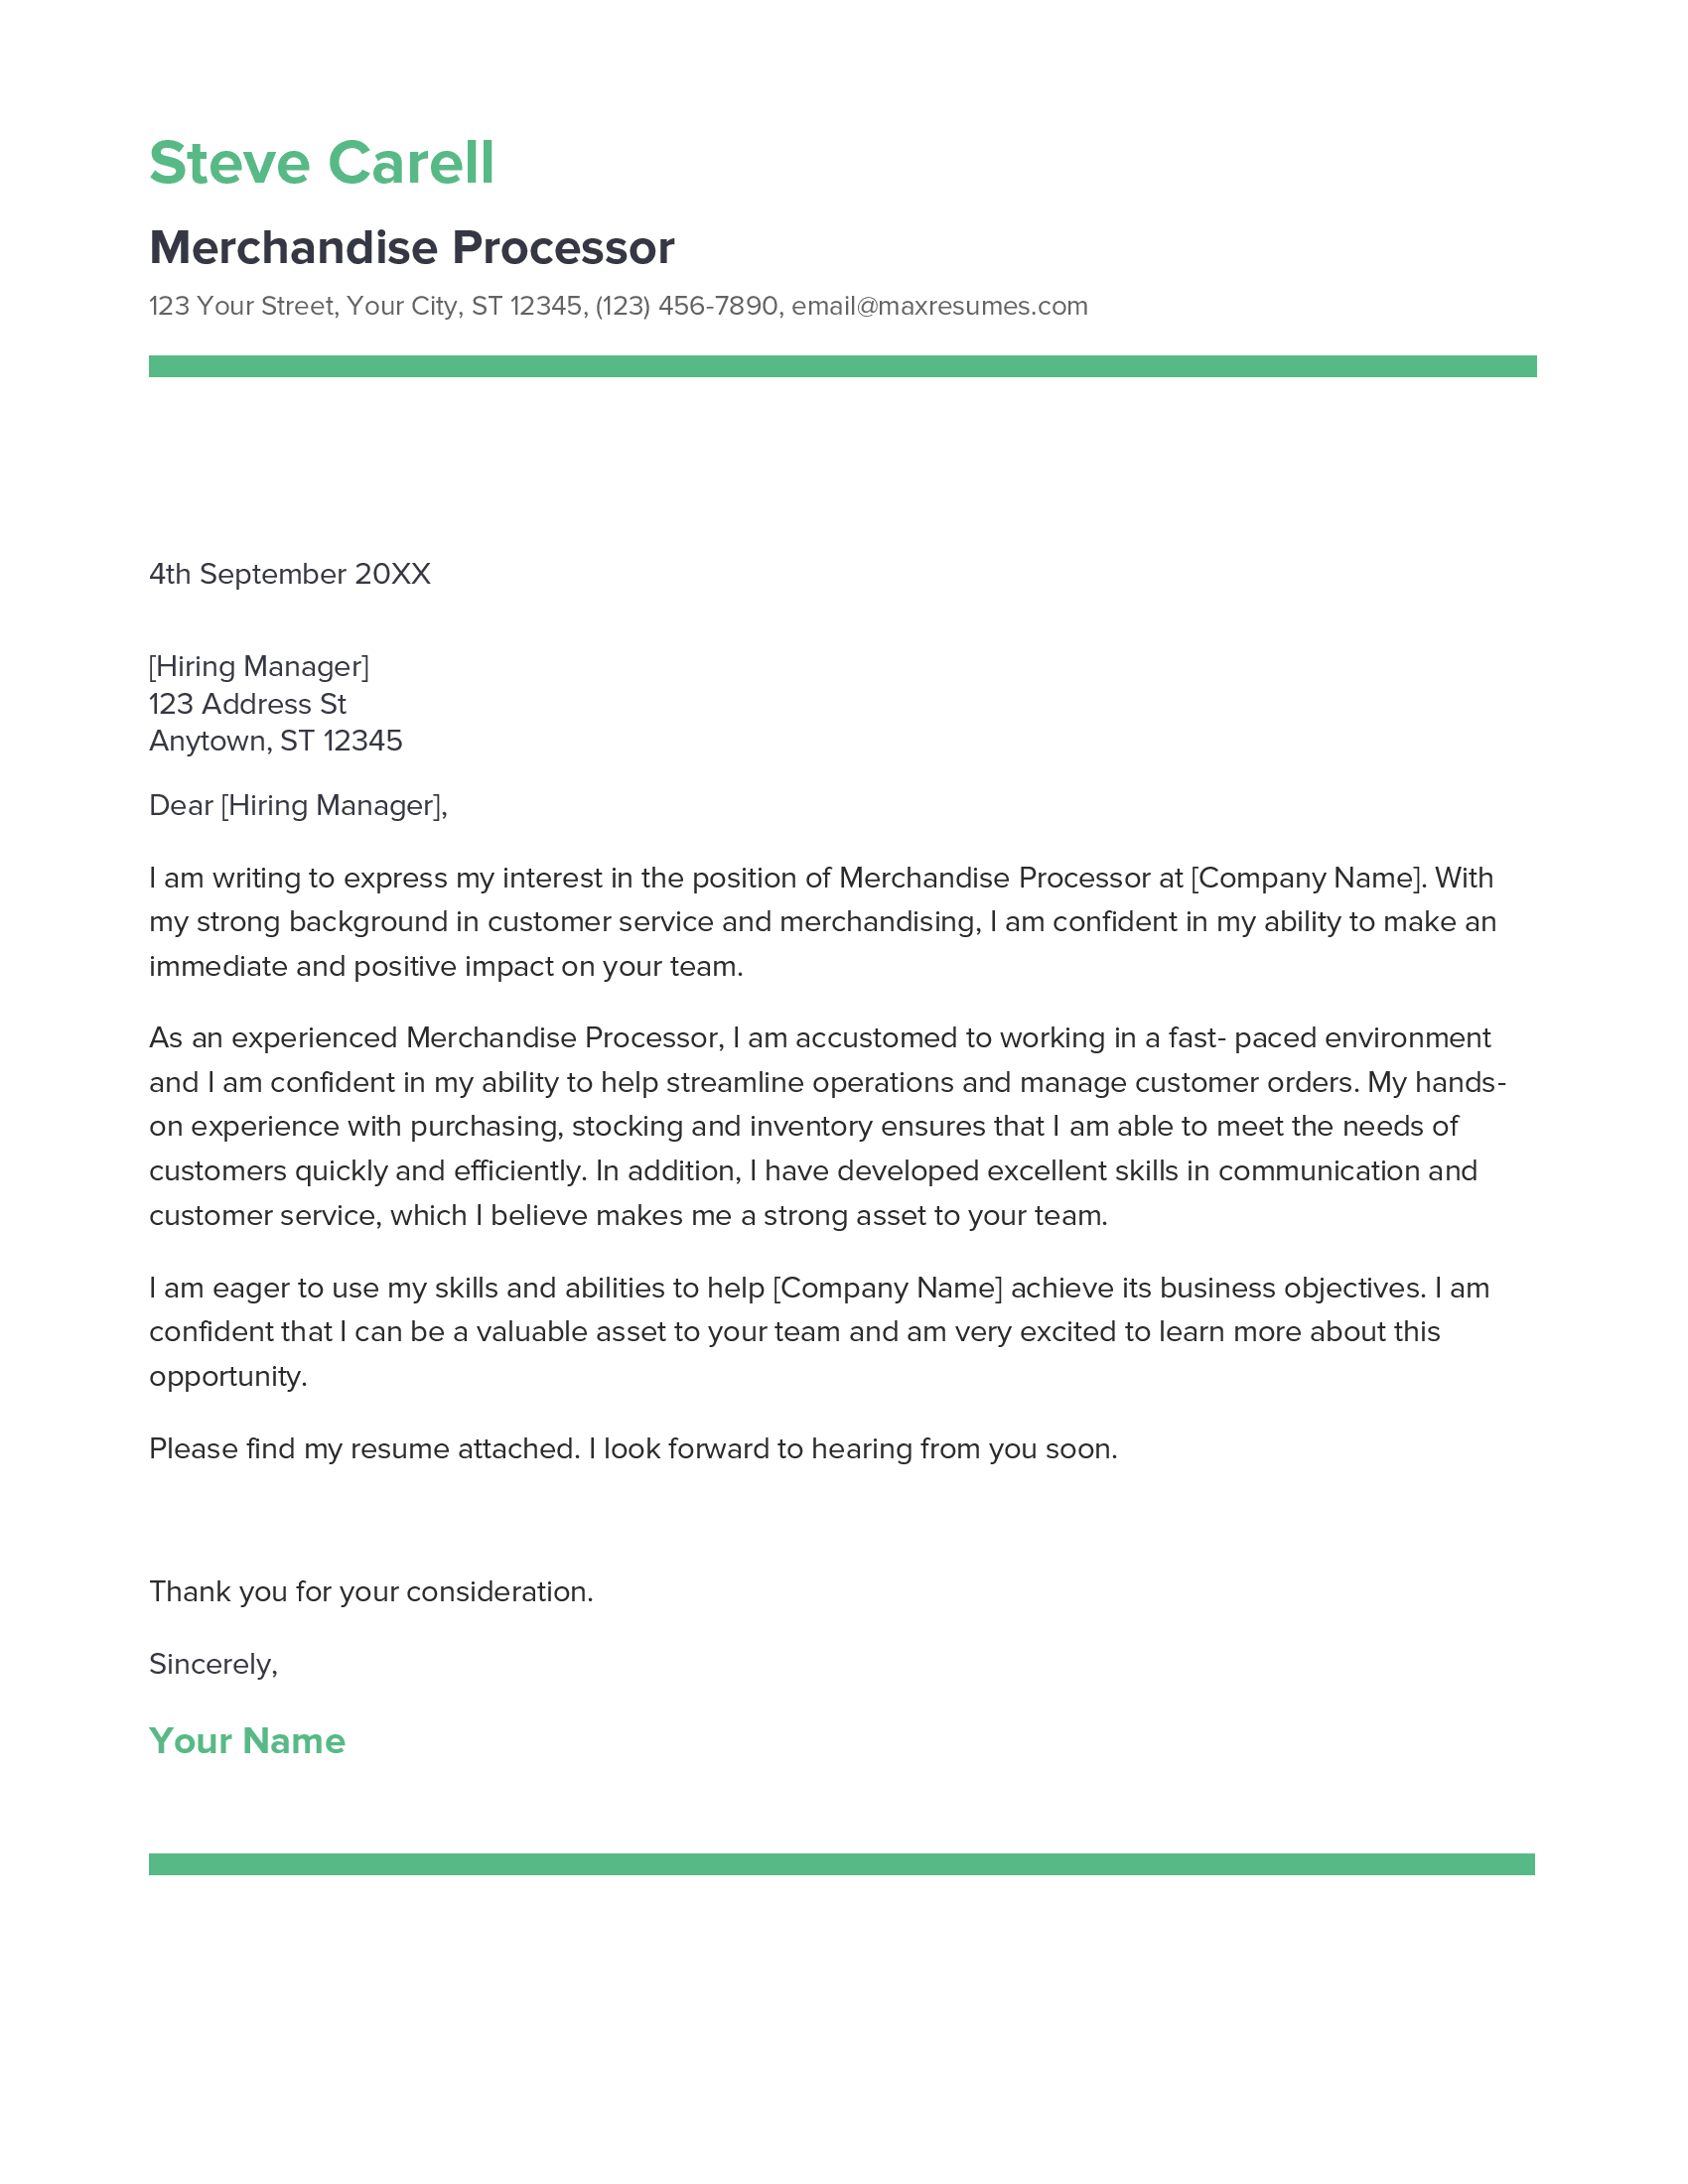 Merchandise Processor Cover Letter Example